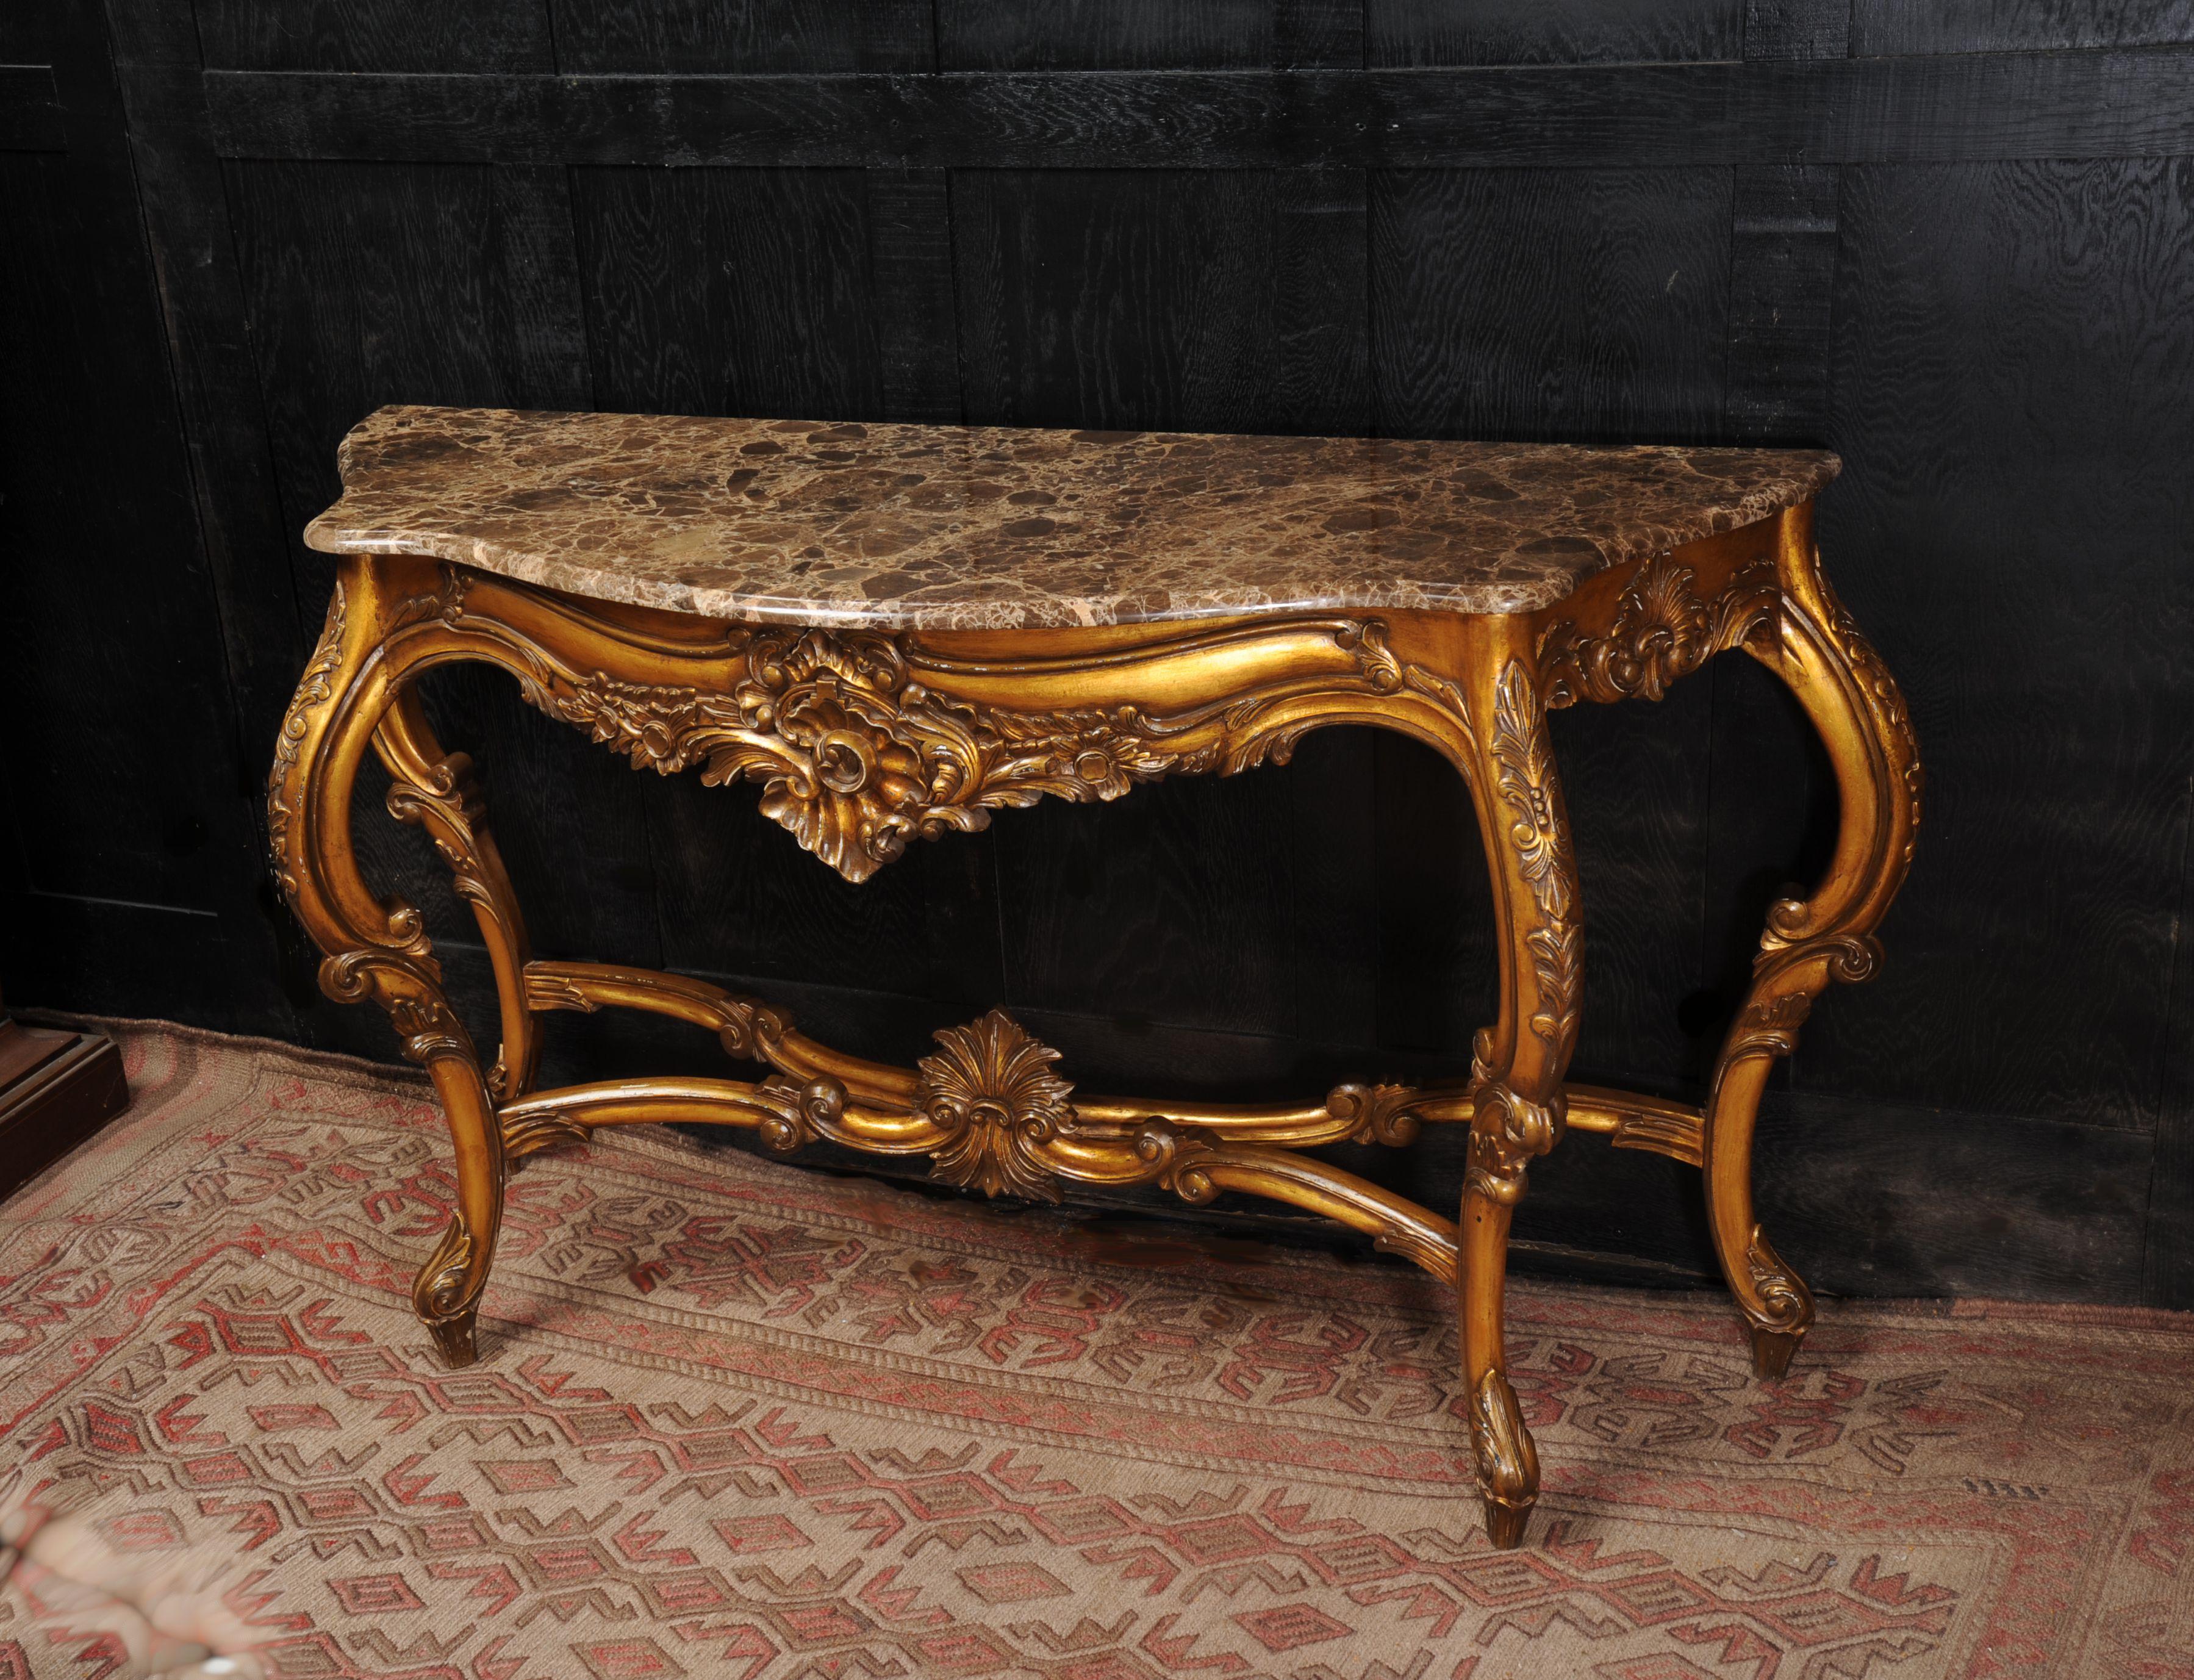 A lovely large serpentine Rococo console table with marble top. Vintage of some age with a great look. Marble has a good polish, some light scratches. We also have a mirror available that goes well with the table.